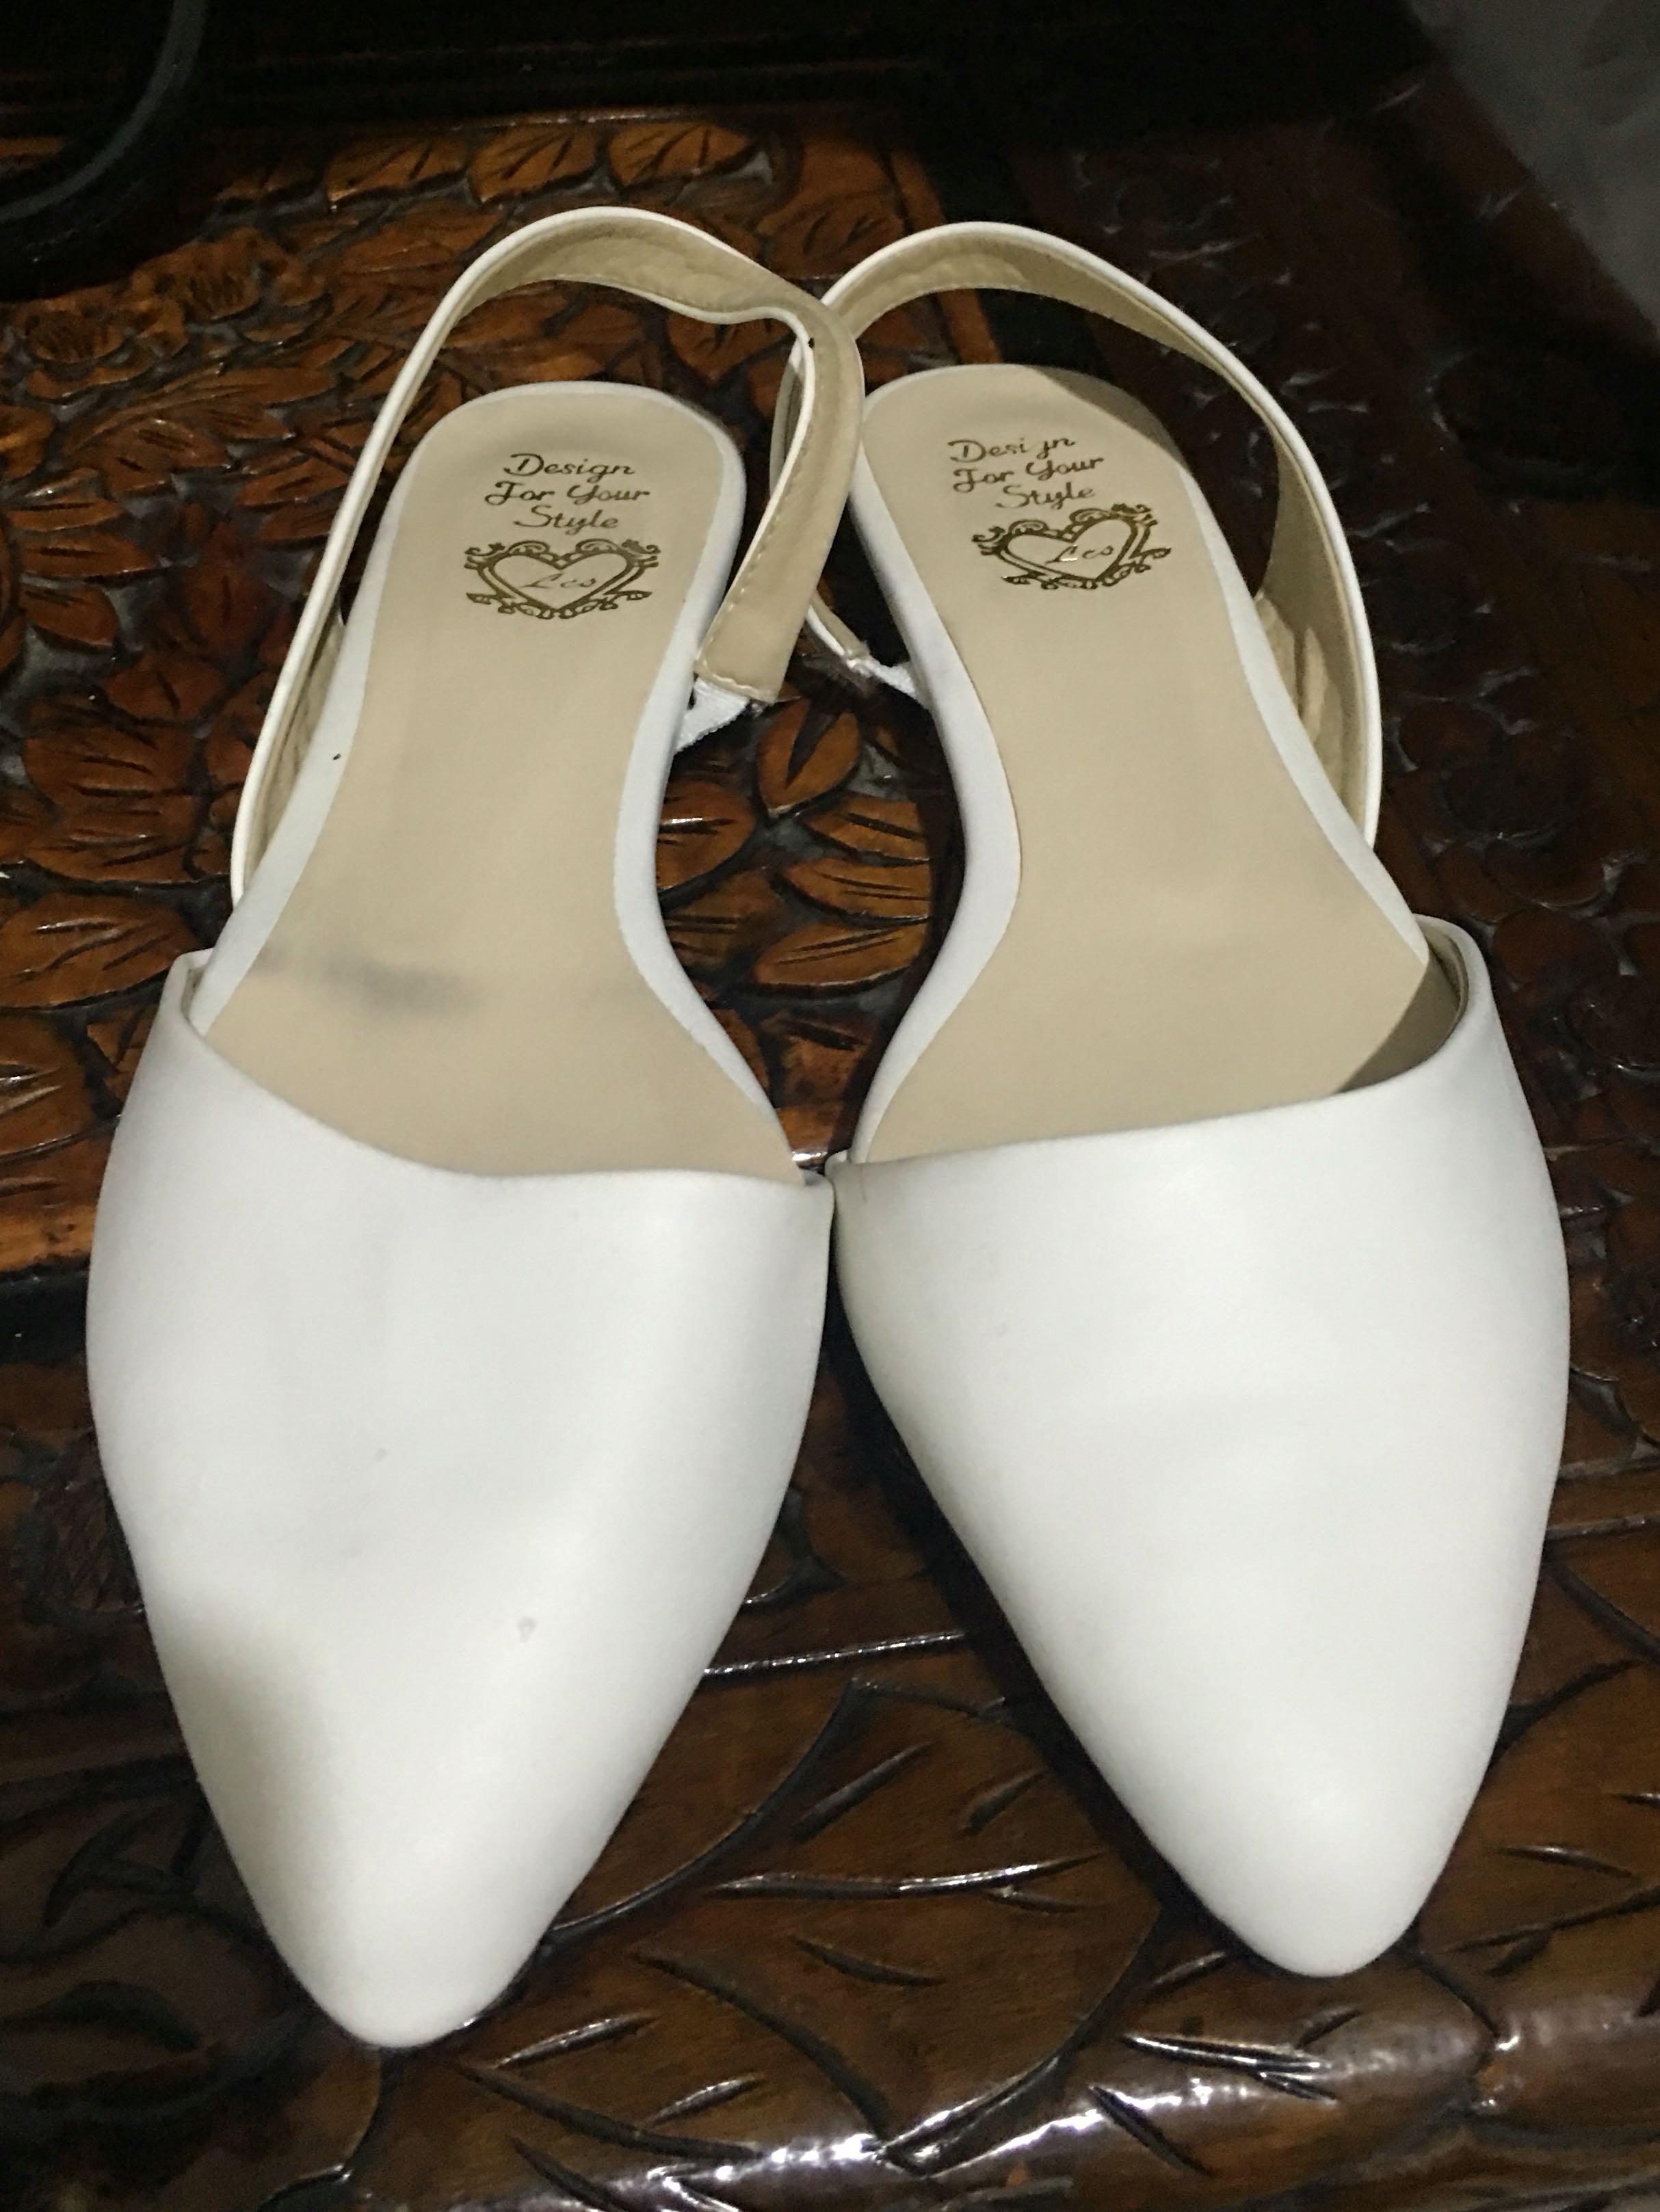 pointed womens flats